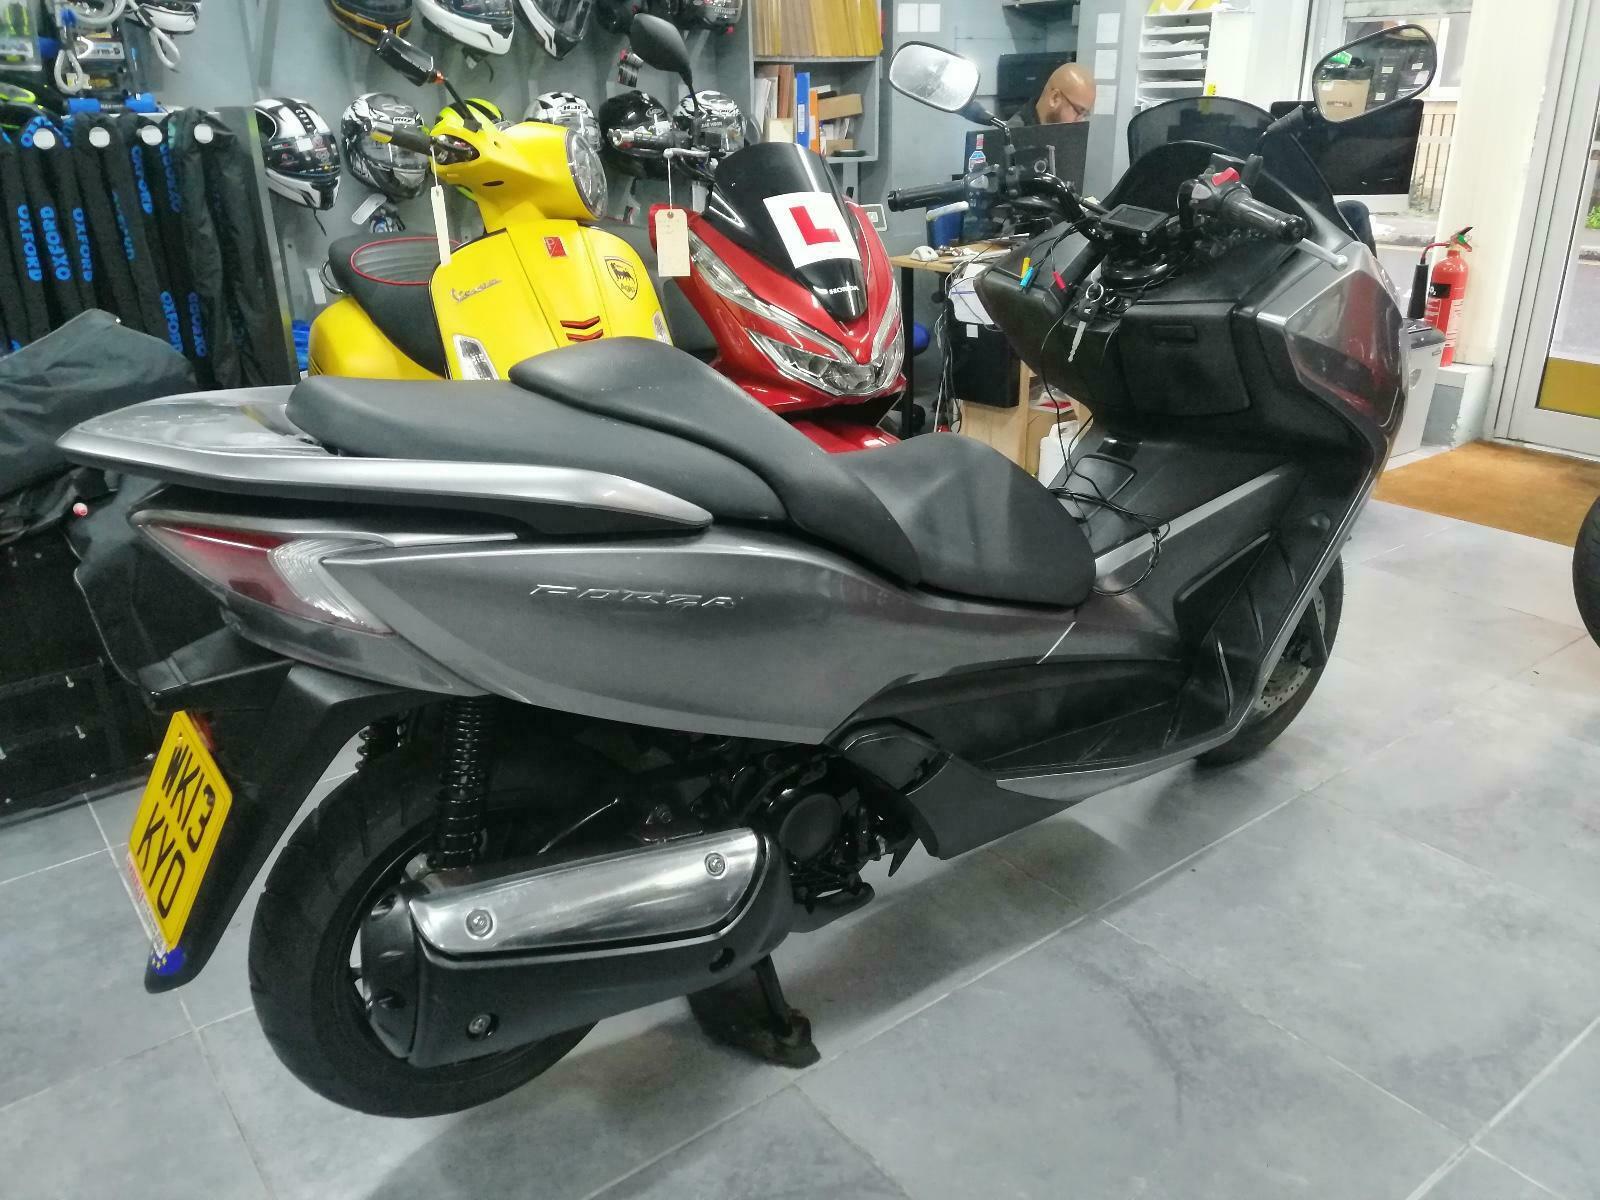 Honda Forza 300, Excellent condition with low mileage